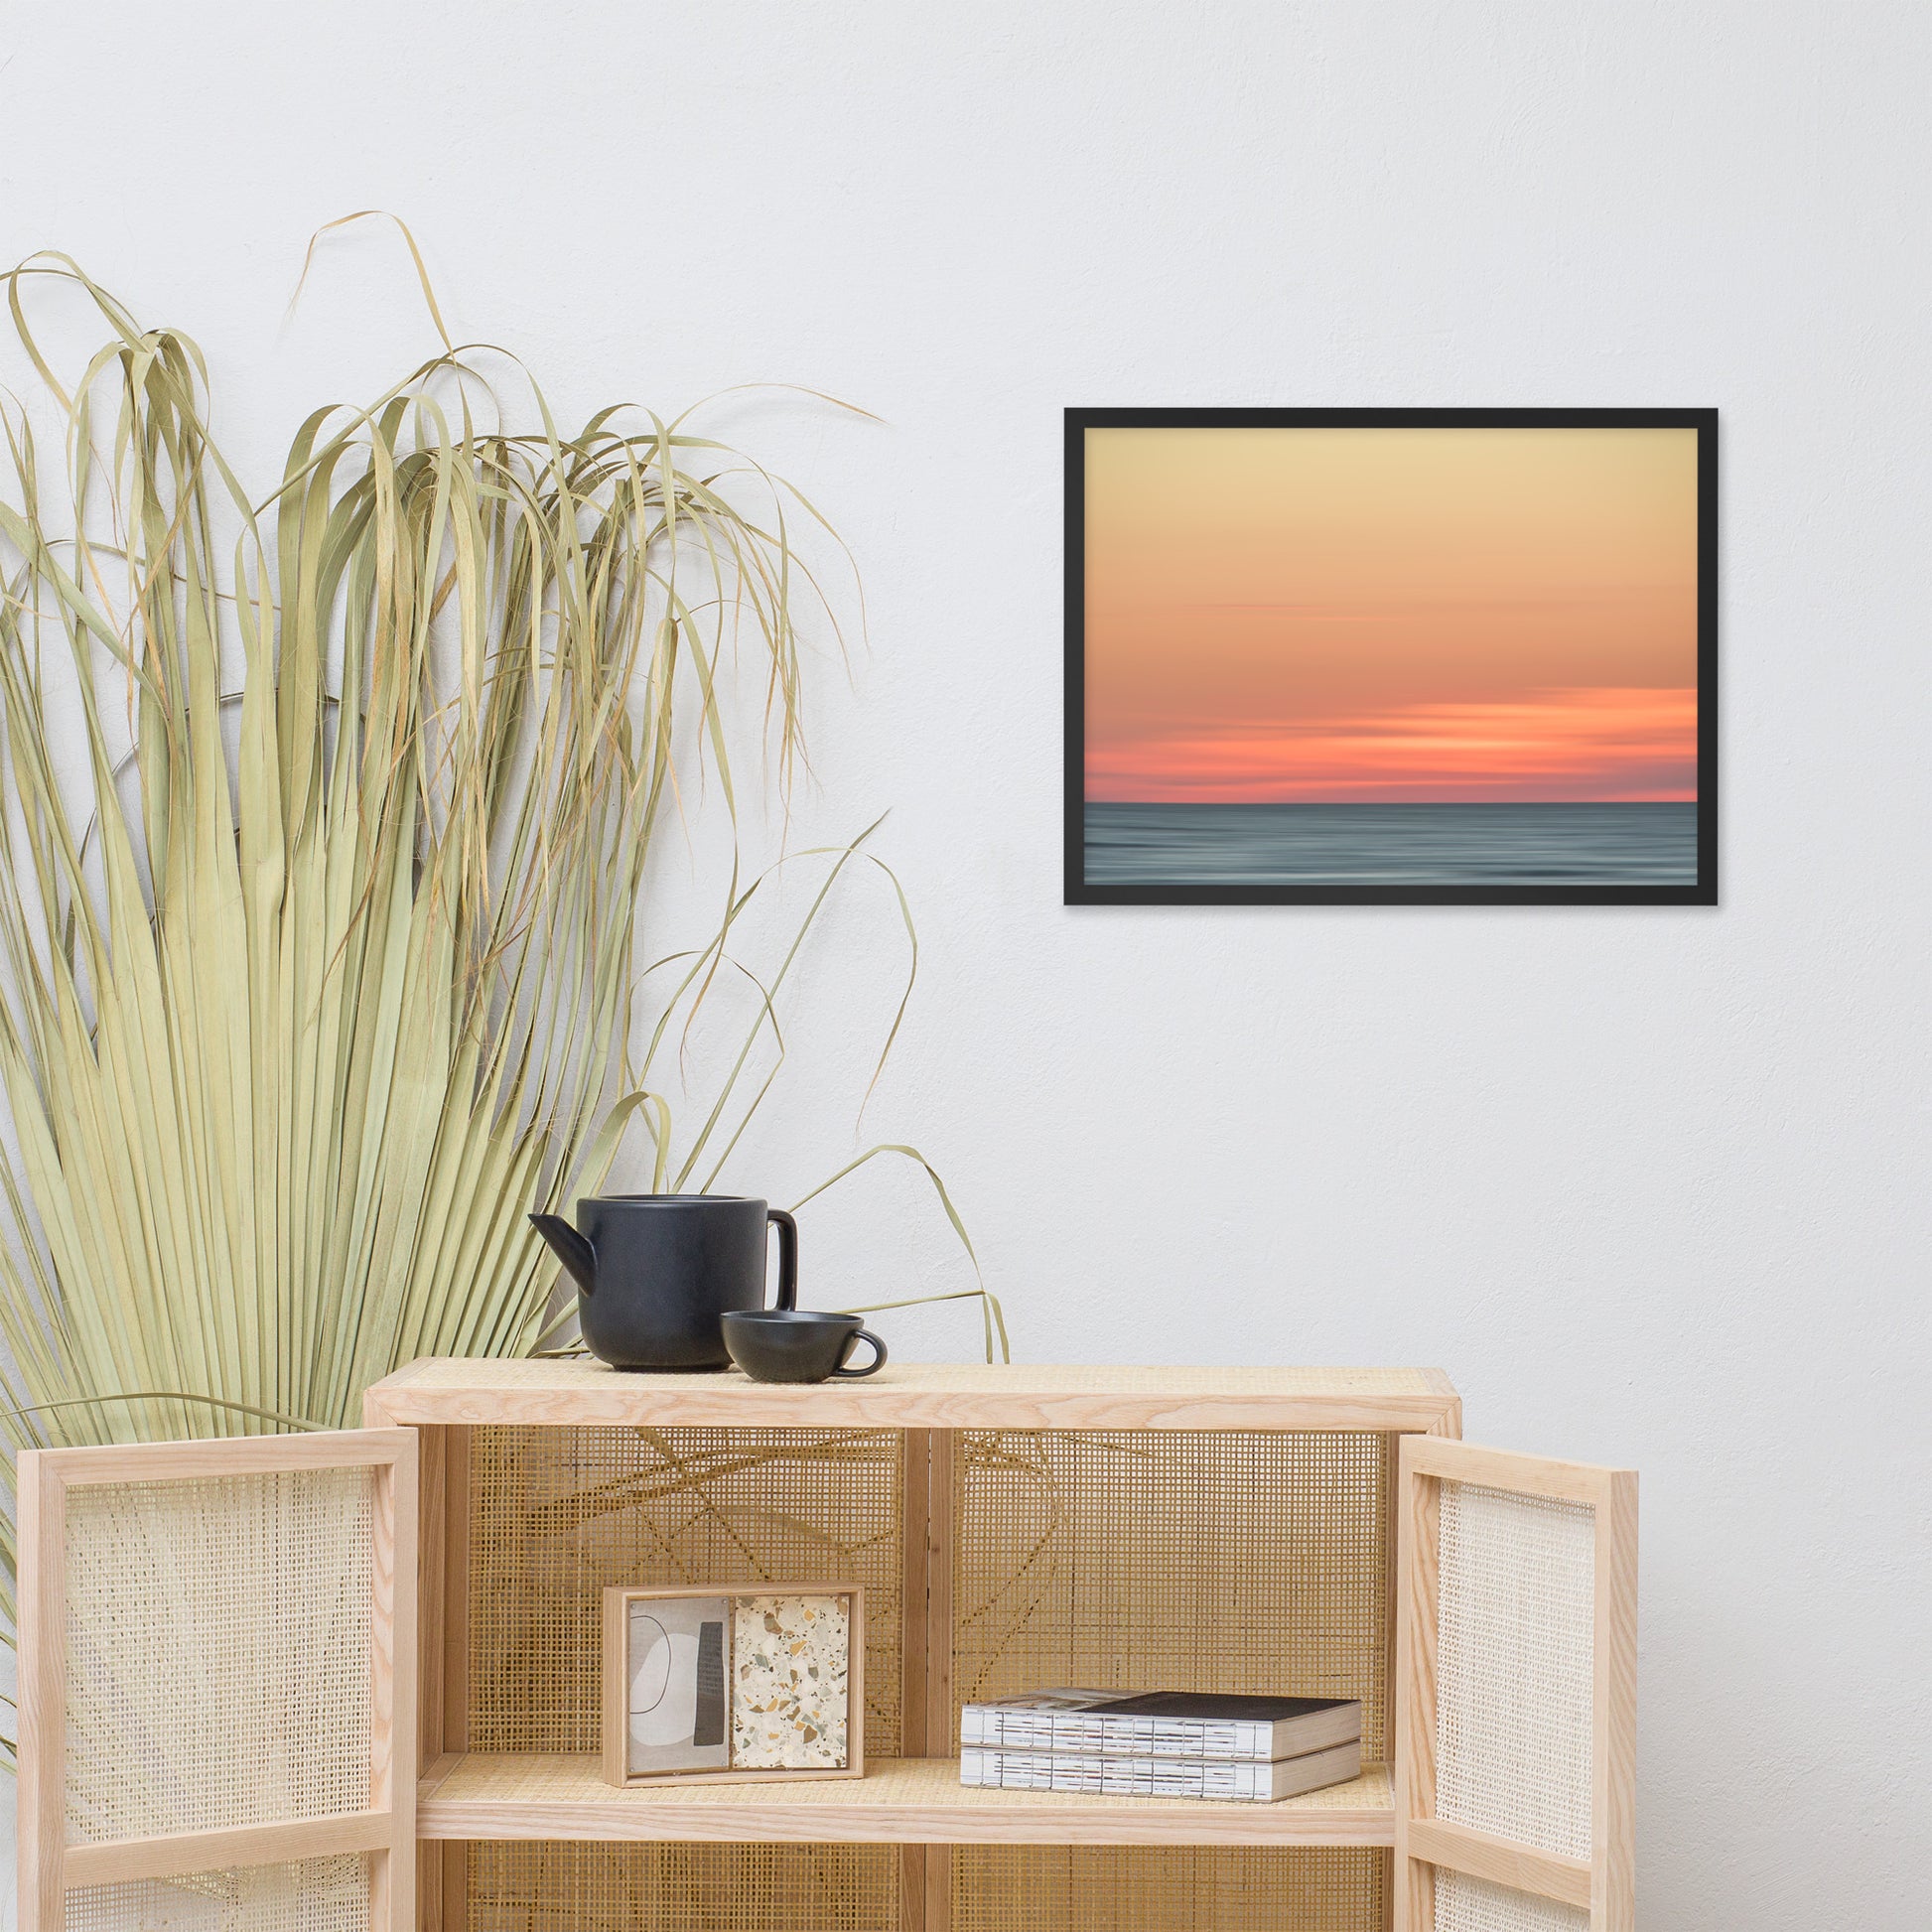 wall hangings for dining room, Pink Coastal Wall Art: Abstract Color Blend Ocean Sunset - Coastal / Beach / Seascape / Nature / Landscape Photo Framed Wall Art Print - Artwork - Wall Decor